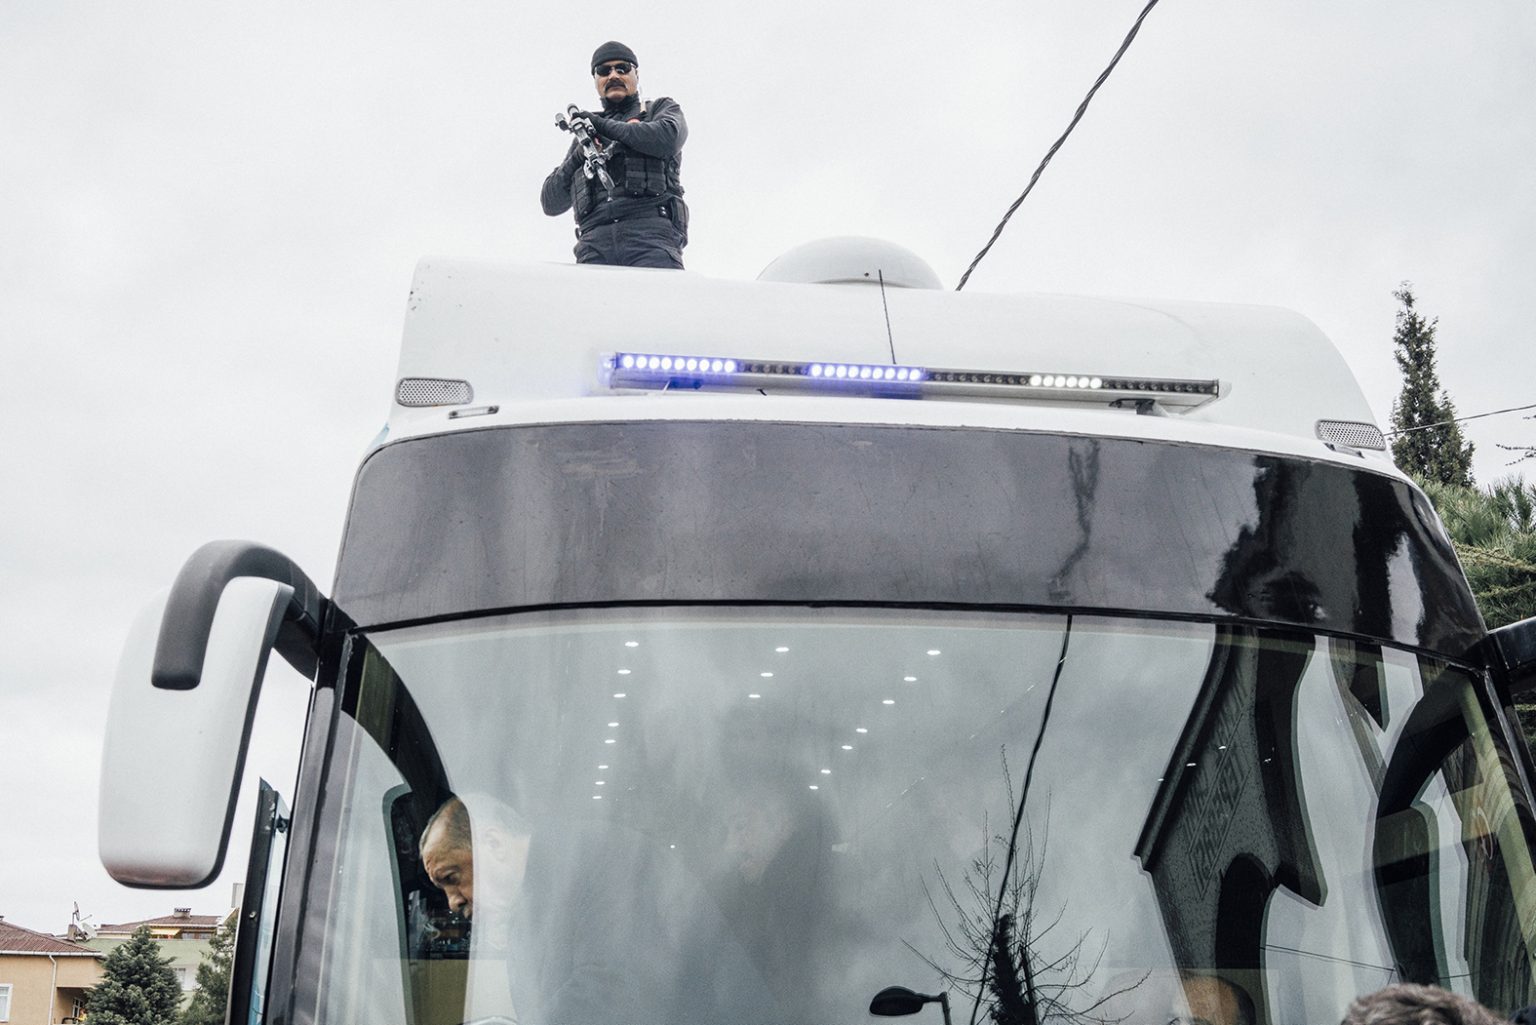 TURKEY. Istanbul, 29 March 2019 – A member of President Erdogan’s security force keeps watch from atop a bus where President Erdogan is getting off during his rally campaign in support of his candidates for the municipal elections in Pendik District, Istanbul.

TURKEY. Istanbul, 29 March 2019 – Un uomo della sicurezza appostato sopra un un autobus nel quartiere di Pendik durante la campagna elettorale del presidente Erdogan a sostegno dei suoi candidati alle elezioni municipali.